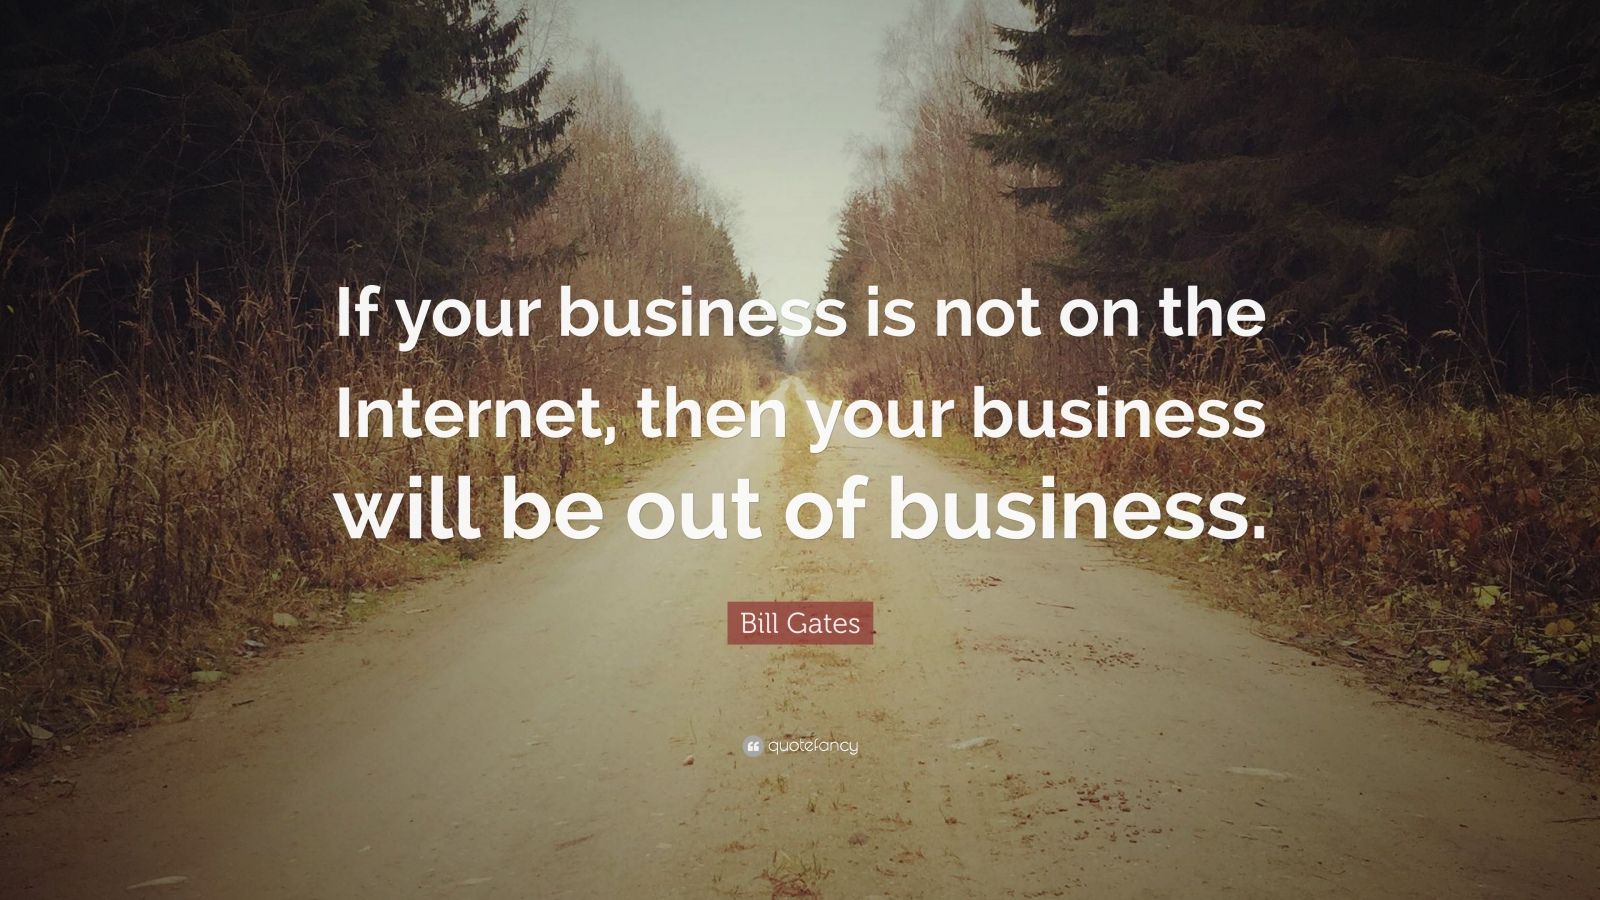 Bill Gates Quote: “If your business is not on the Internet, then your